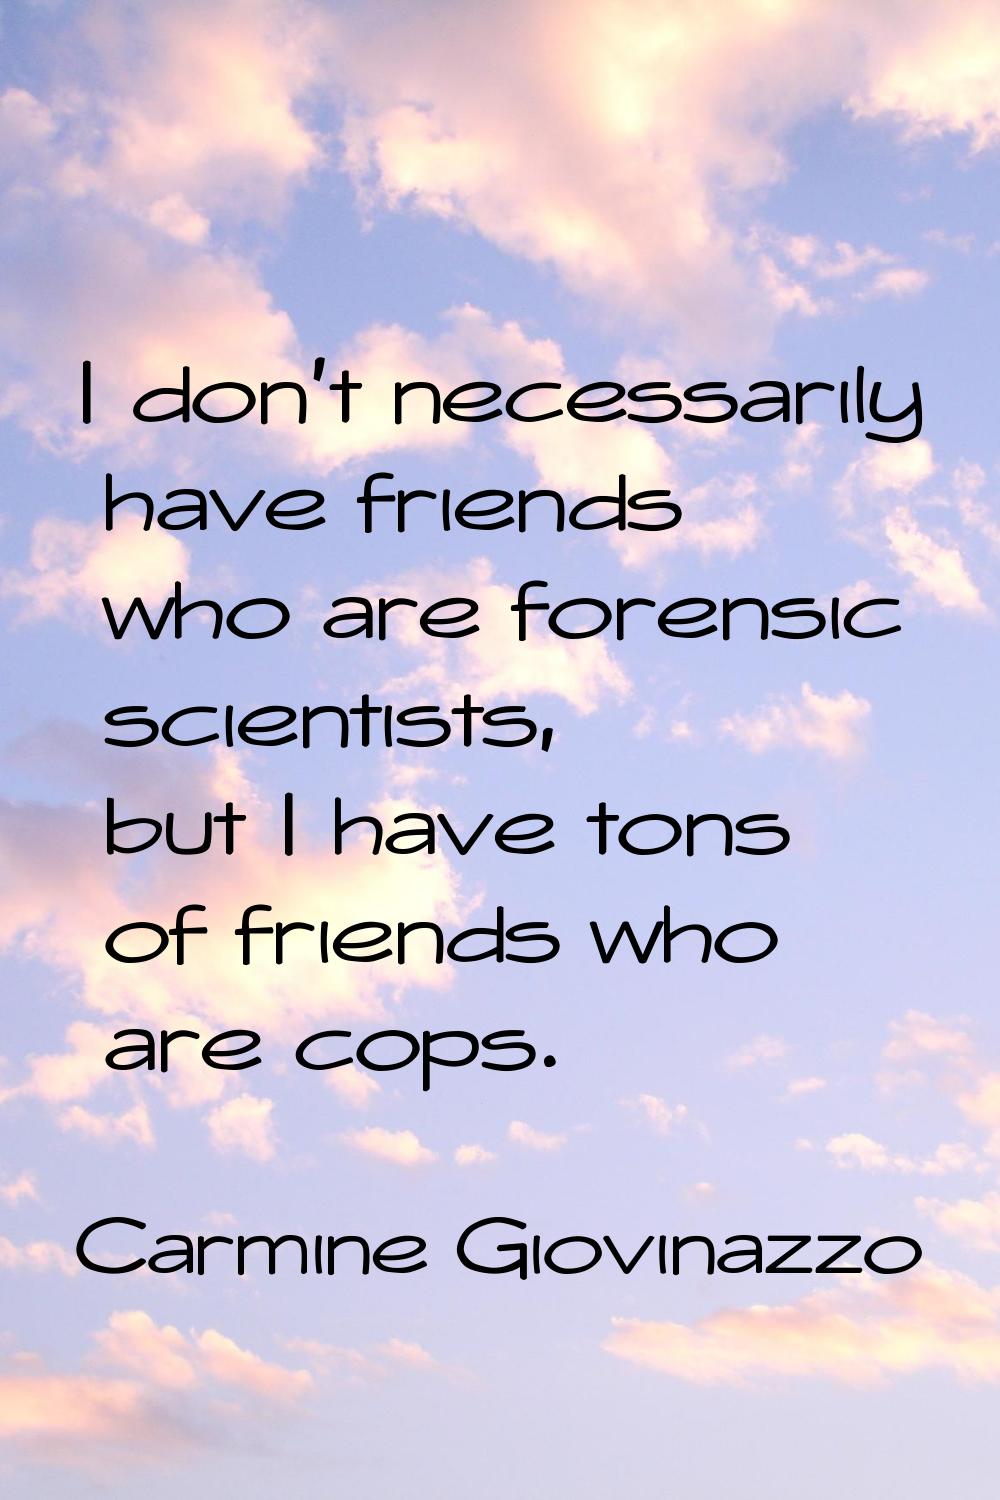 I don't necessarily have friends who are forensic scientists, but I have tons of friends who are co